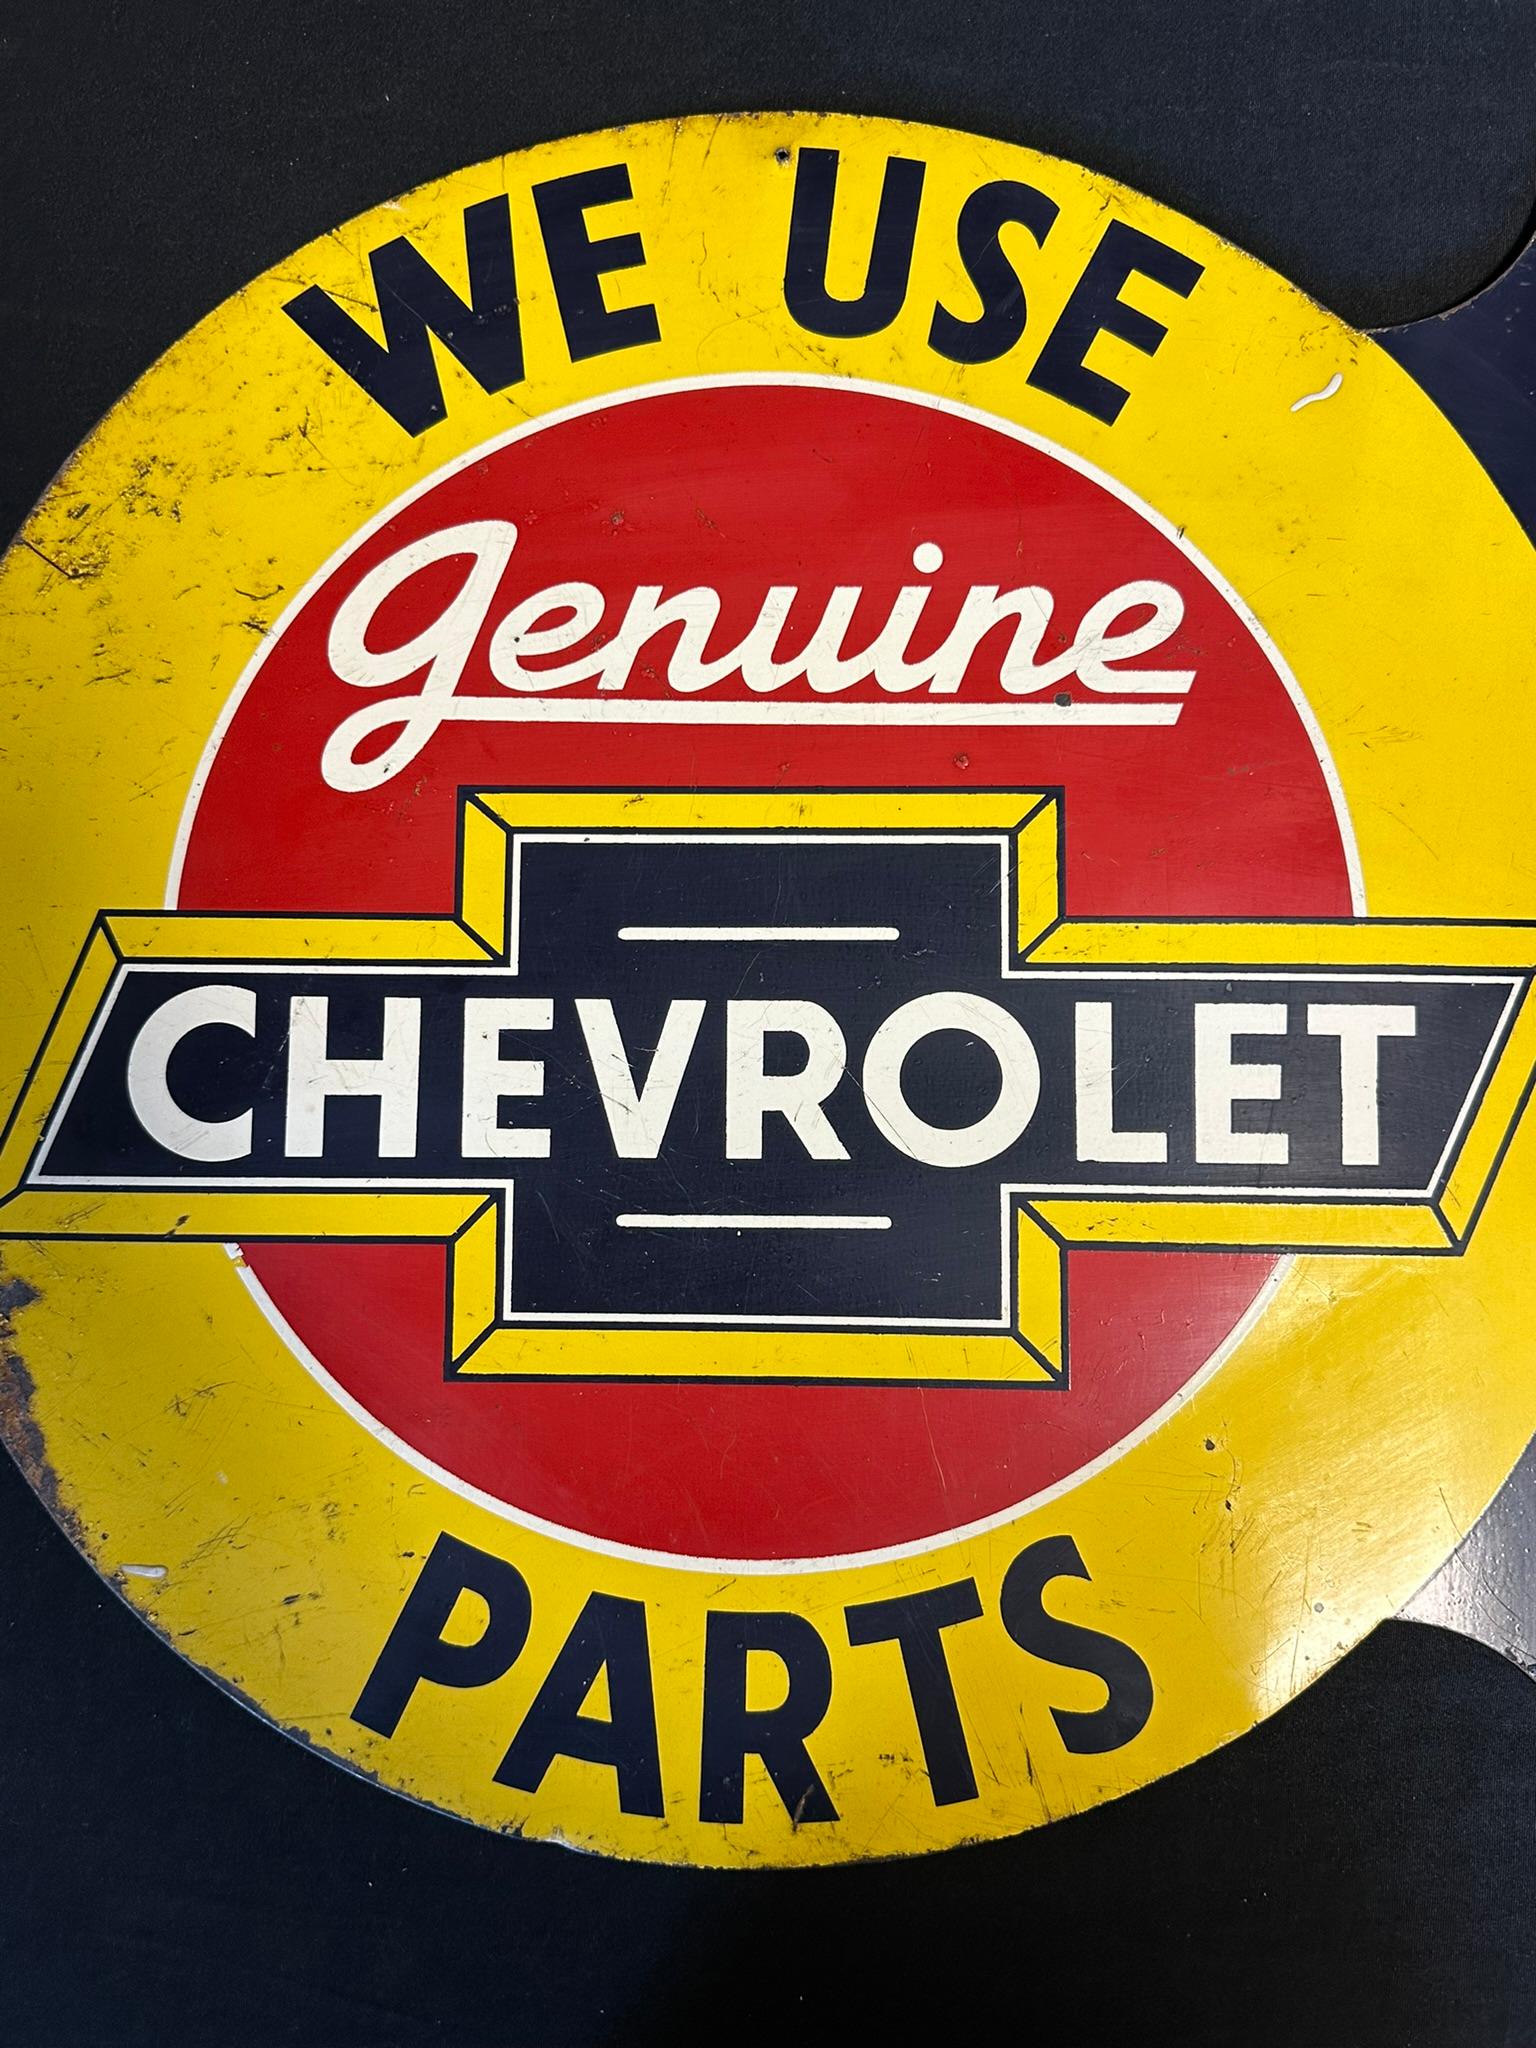 Chevrolet Genuine Parts Double Sided Painted Metal Dealer Flange Advertising Sign Ca. 1940s